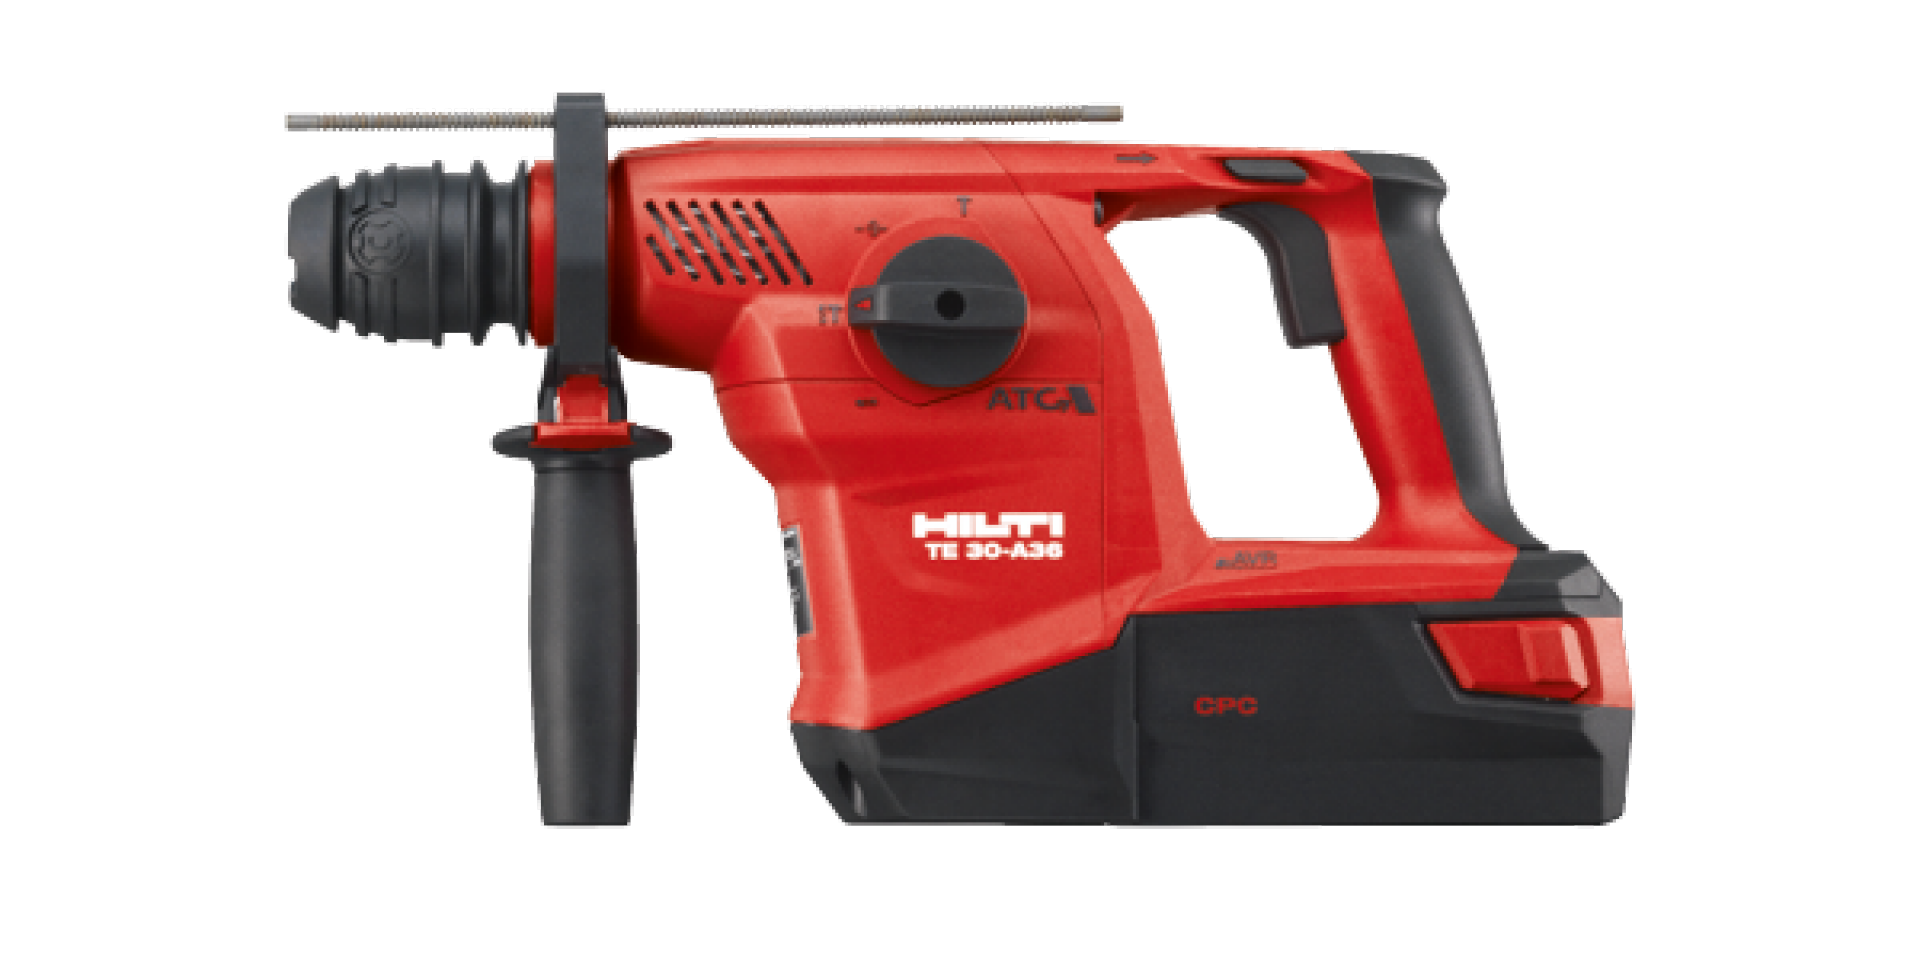 TE 30-A36 Cordless SDS PLUS rotary hammer